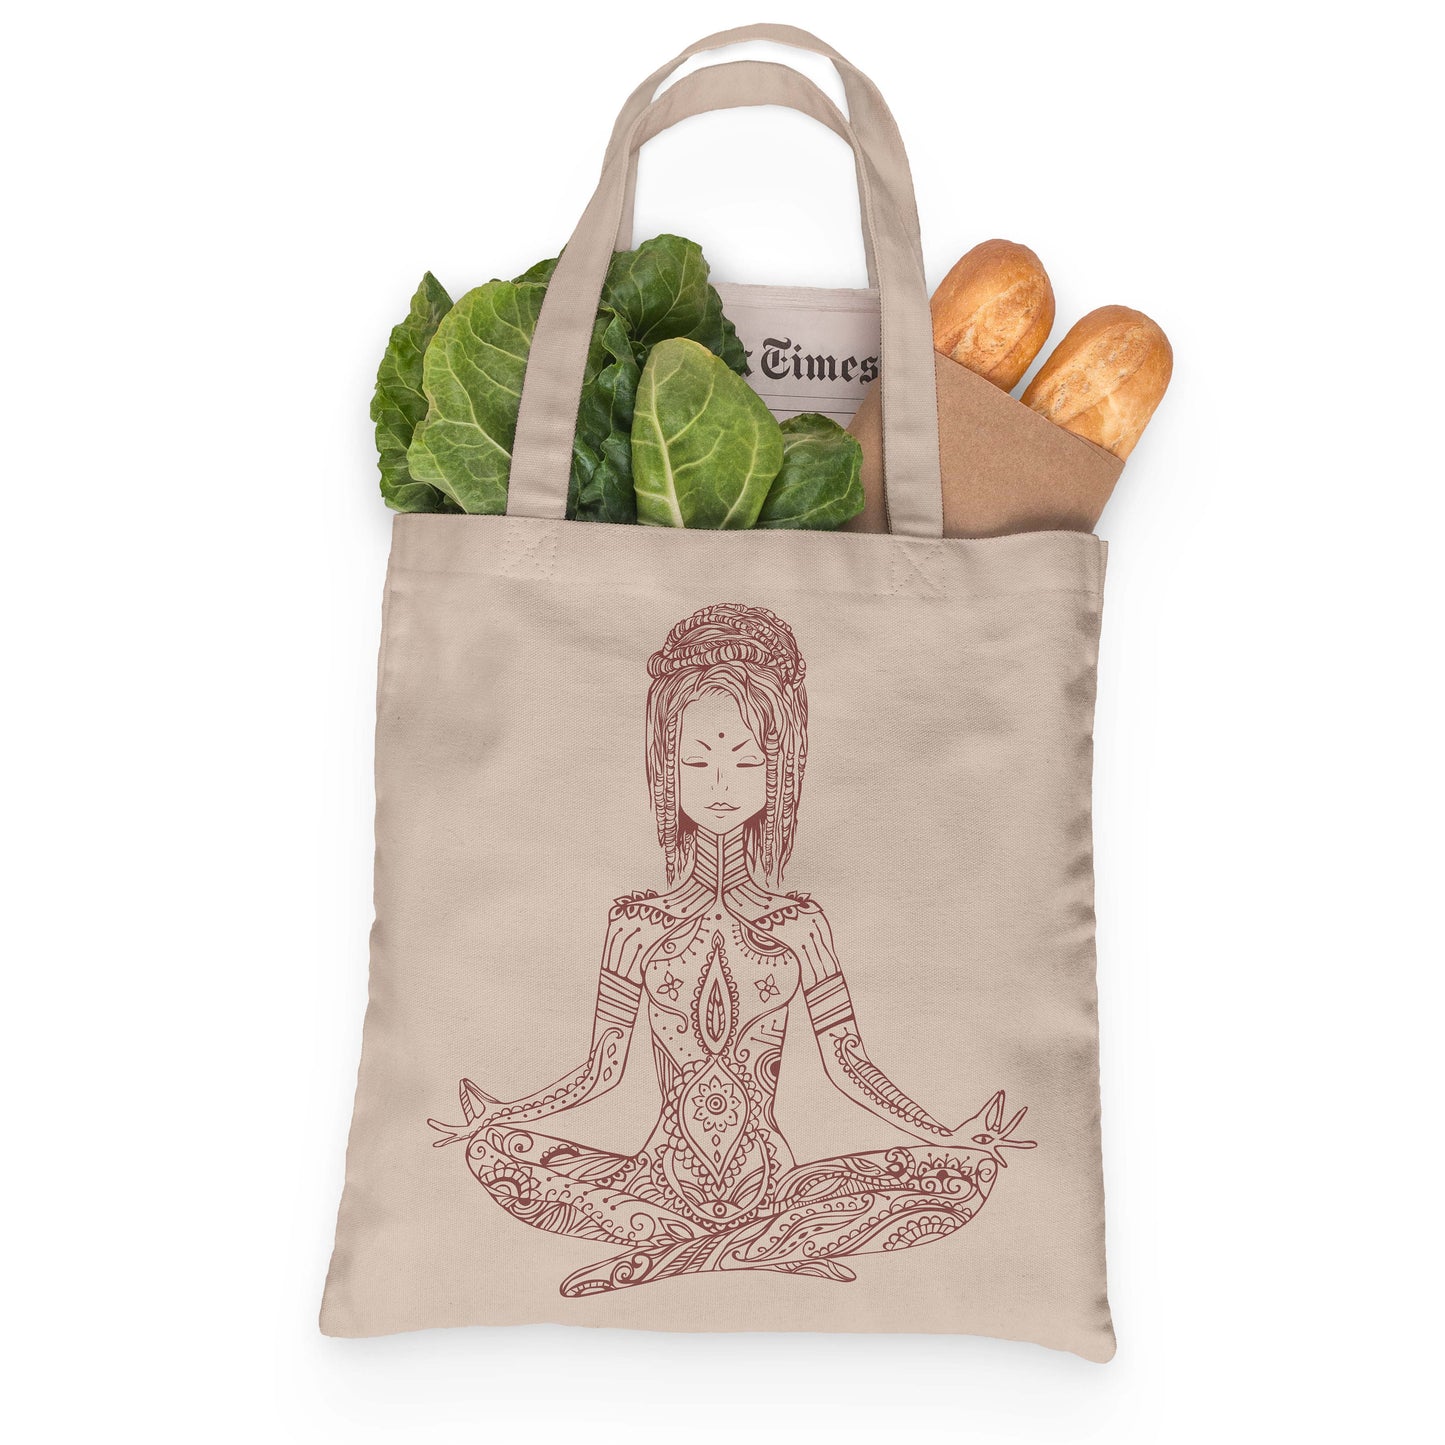 Yoga  Meditation Tote 100% Cotton Fun Grocery Tote, Book Tote, Office Tote. Premium Cotton Canvas 15.5" by 19.5 " with 5" Gusset on bottom